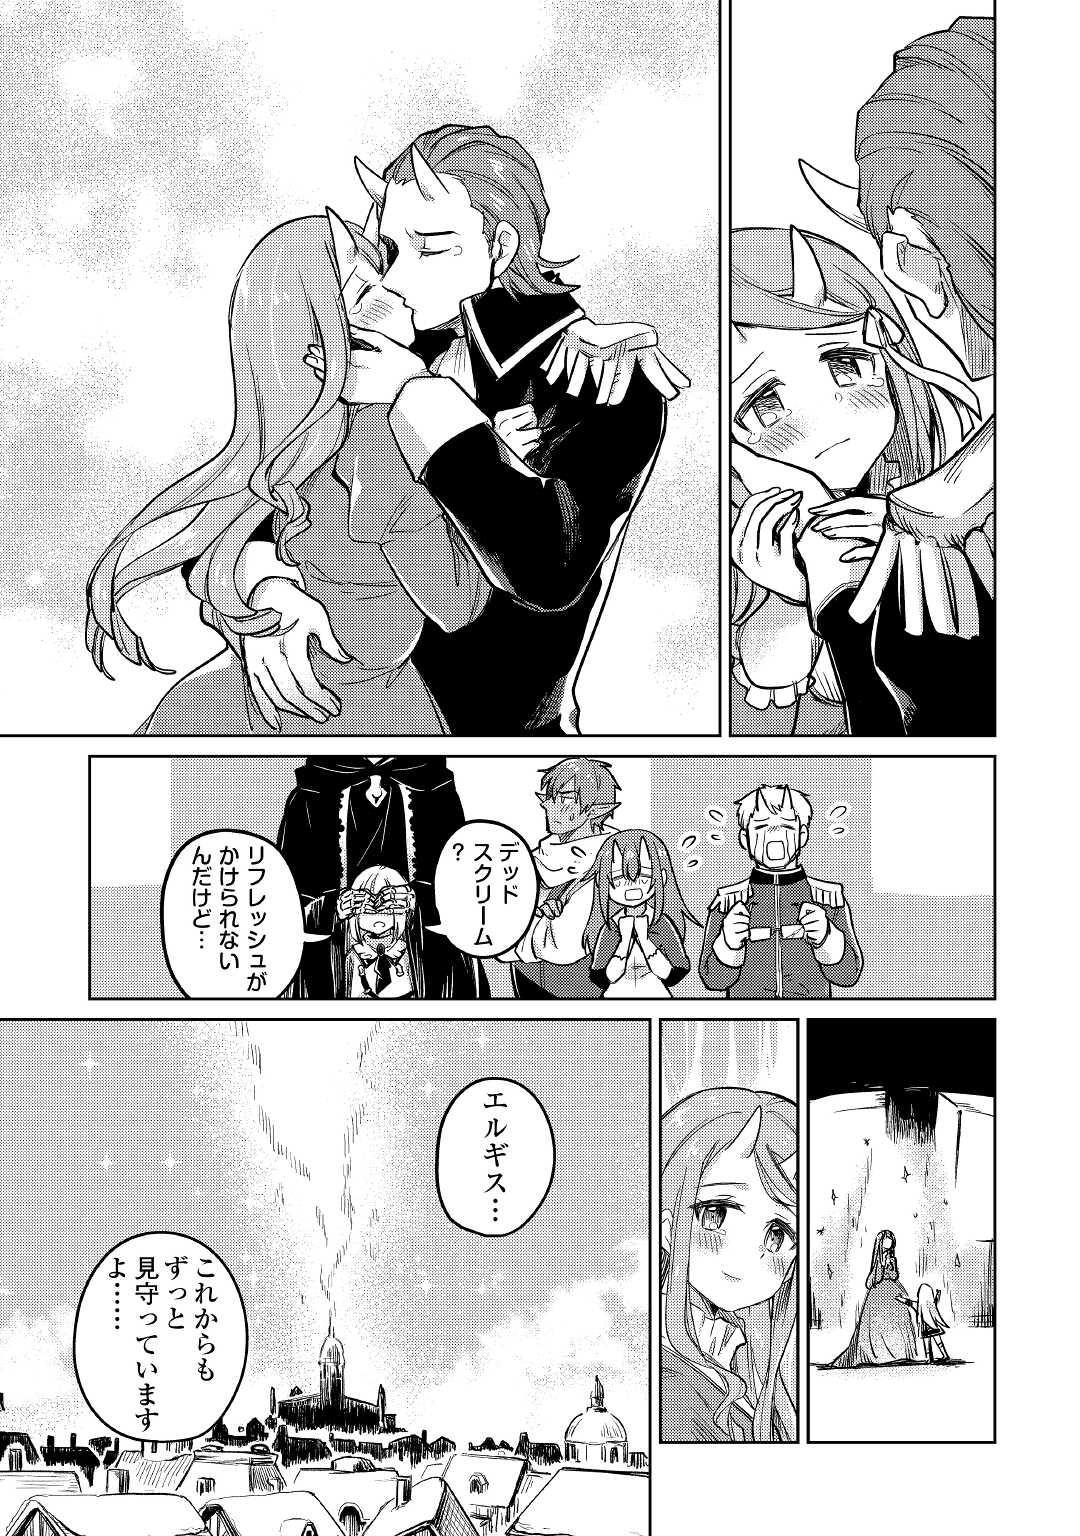 The Former Structural Researcher’s Story of Otherworldly Adventure 第40話 - Page 19